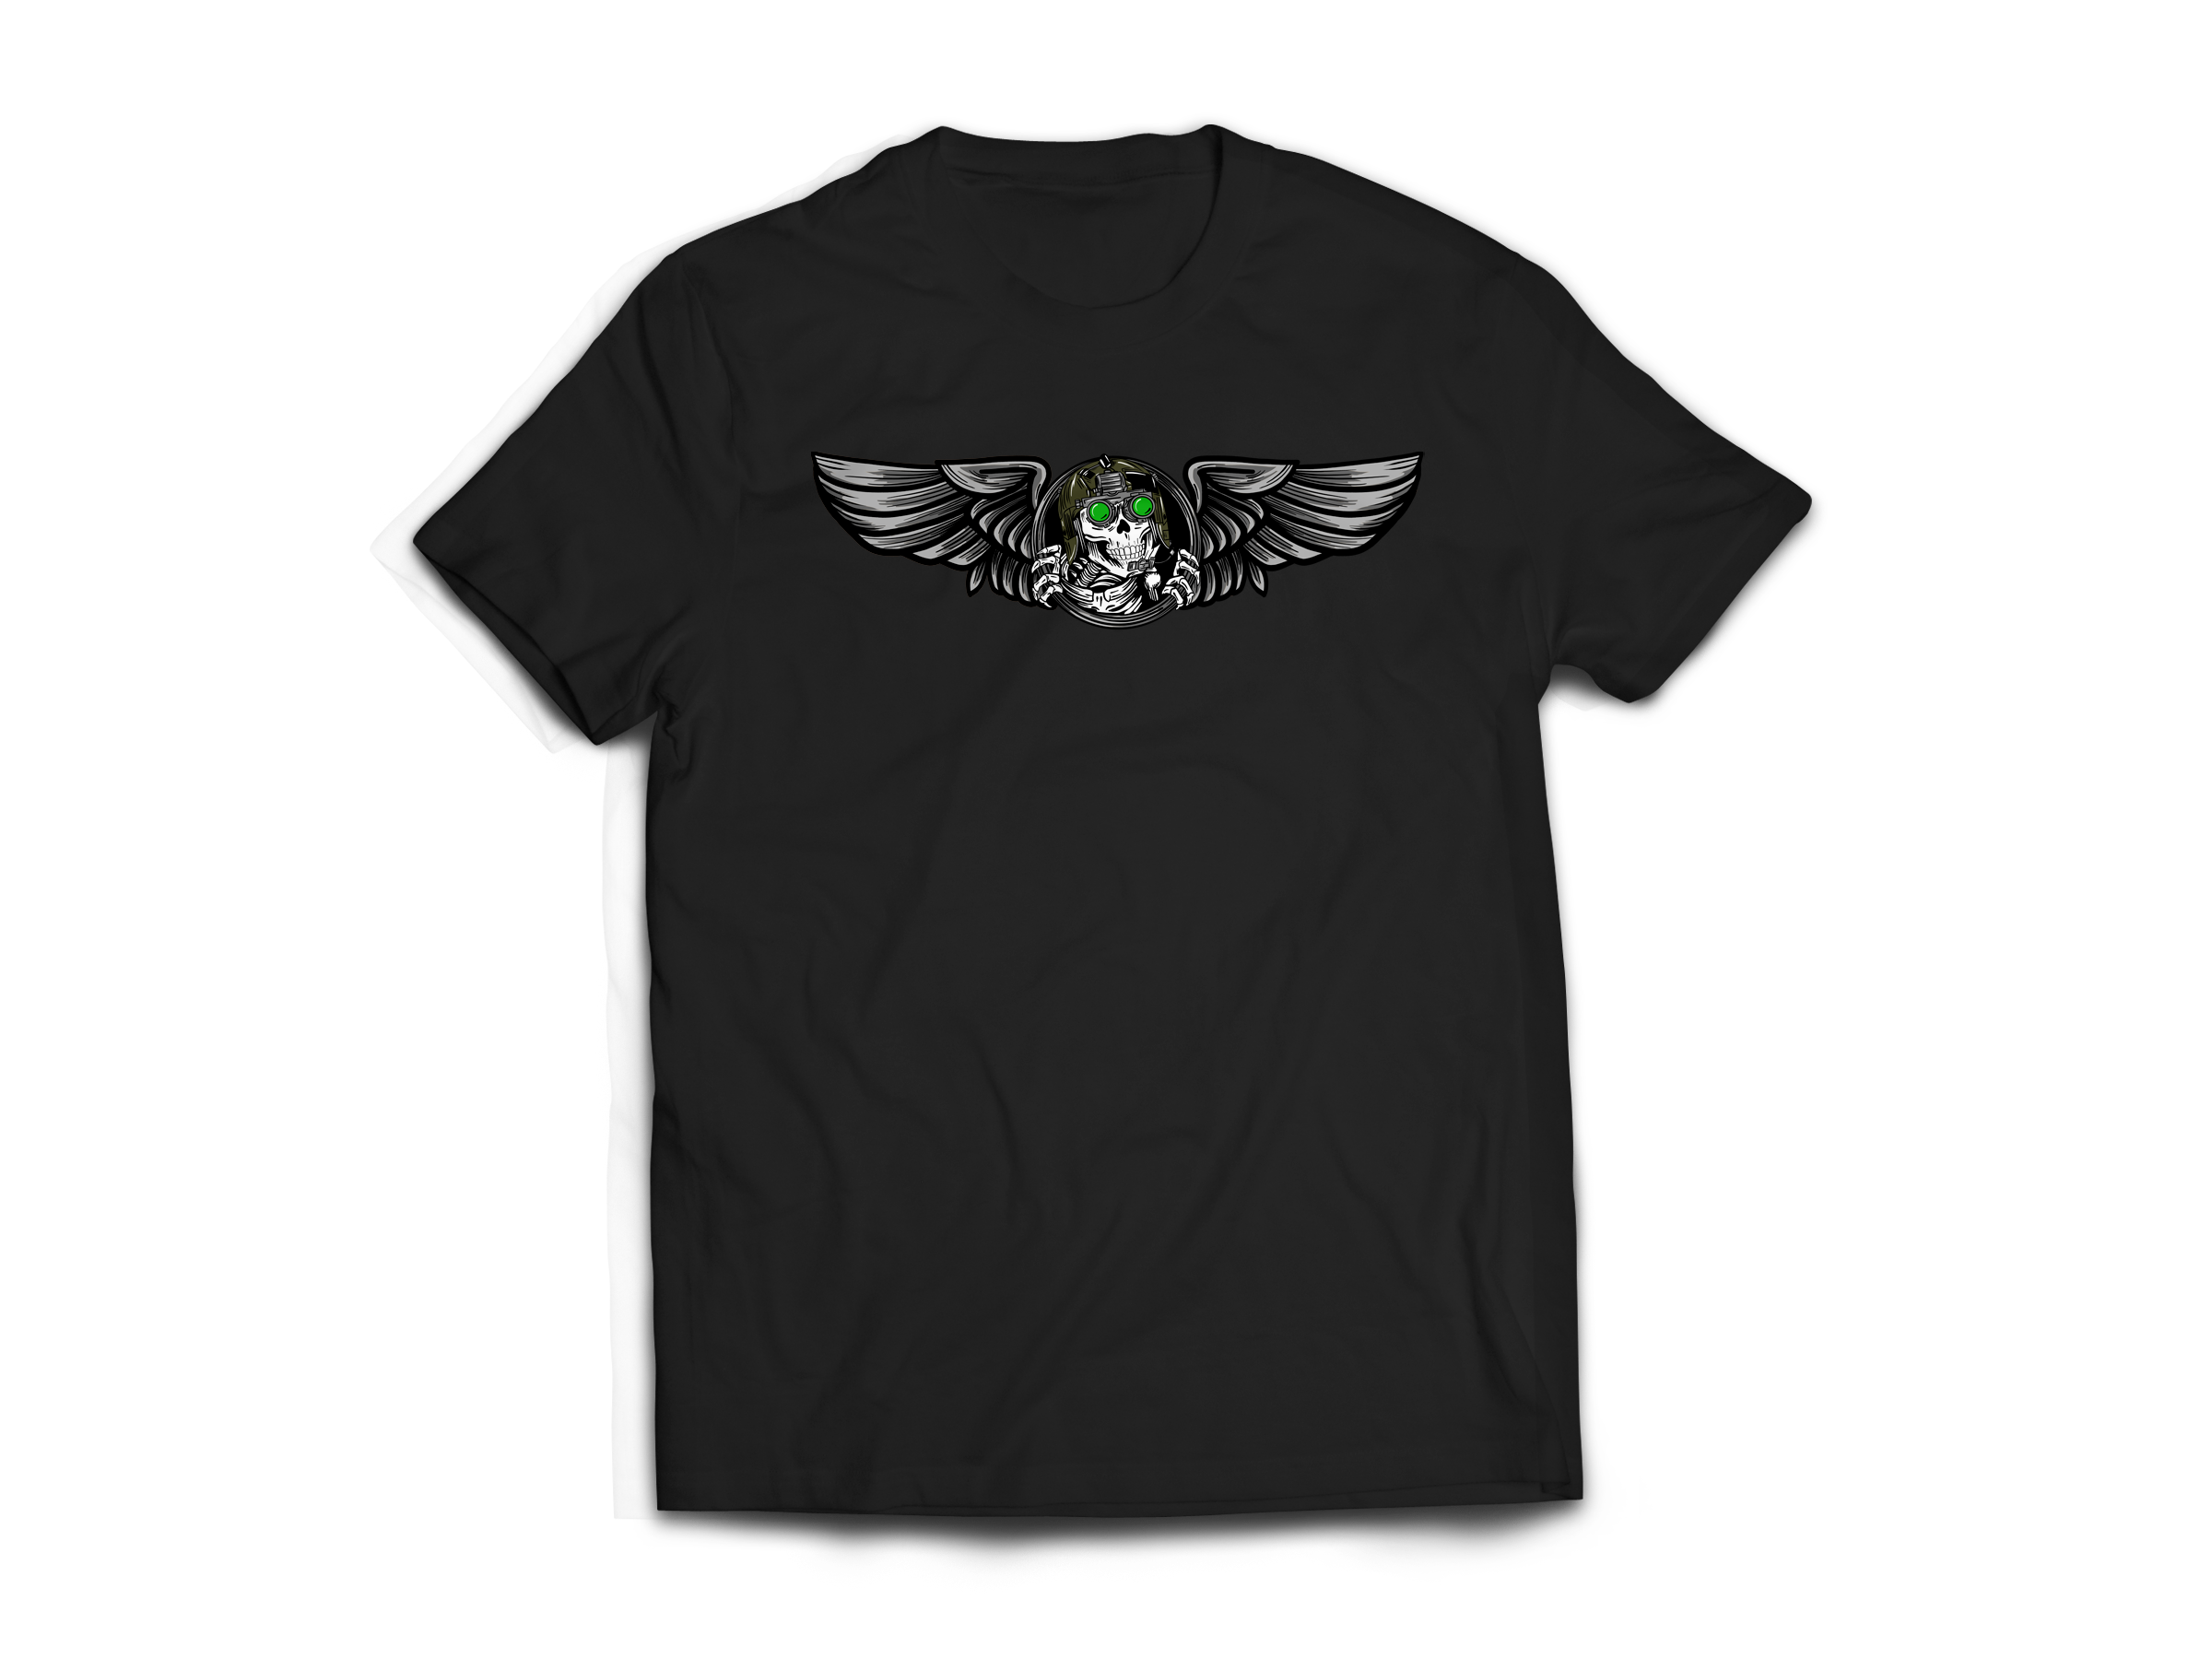 FTID Silver Wings T-Shirt